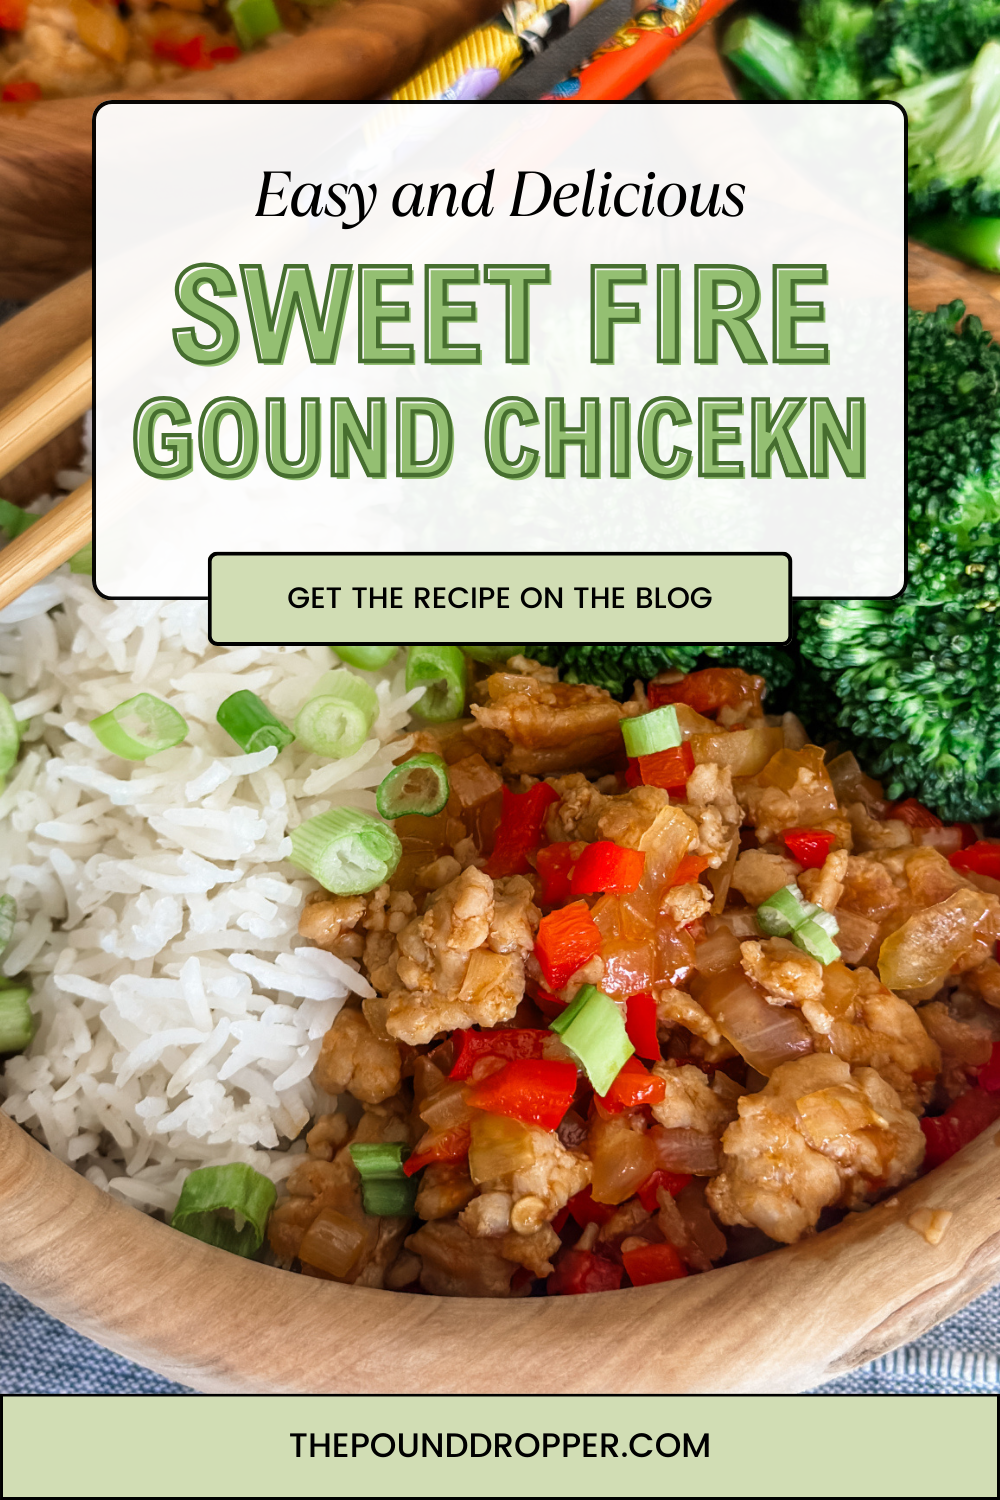 If you're a fan of Panda Express’s SweetFire Chicken then you will love this SweetFire Ground Chicken! Ground chicken sautéed with fresh onions and red bell peppers, all coated in a tangy, sweet, and slightly spicy sauce that will have your taste buds buzzing with delight! via @pounddropper